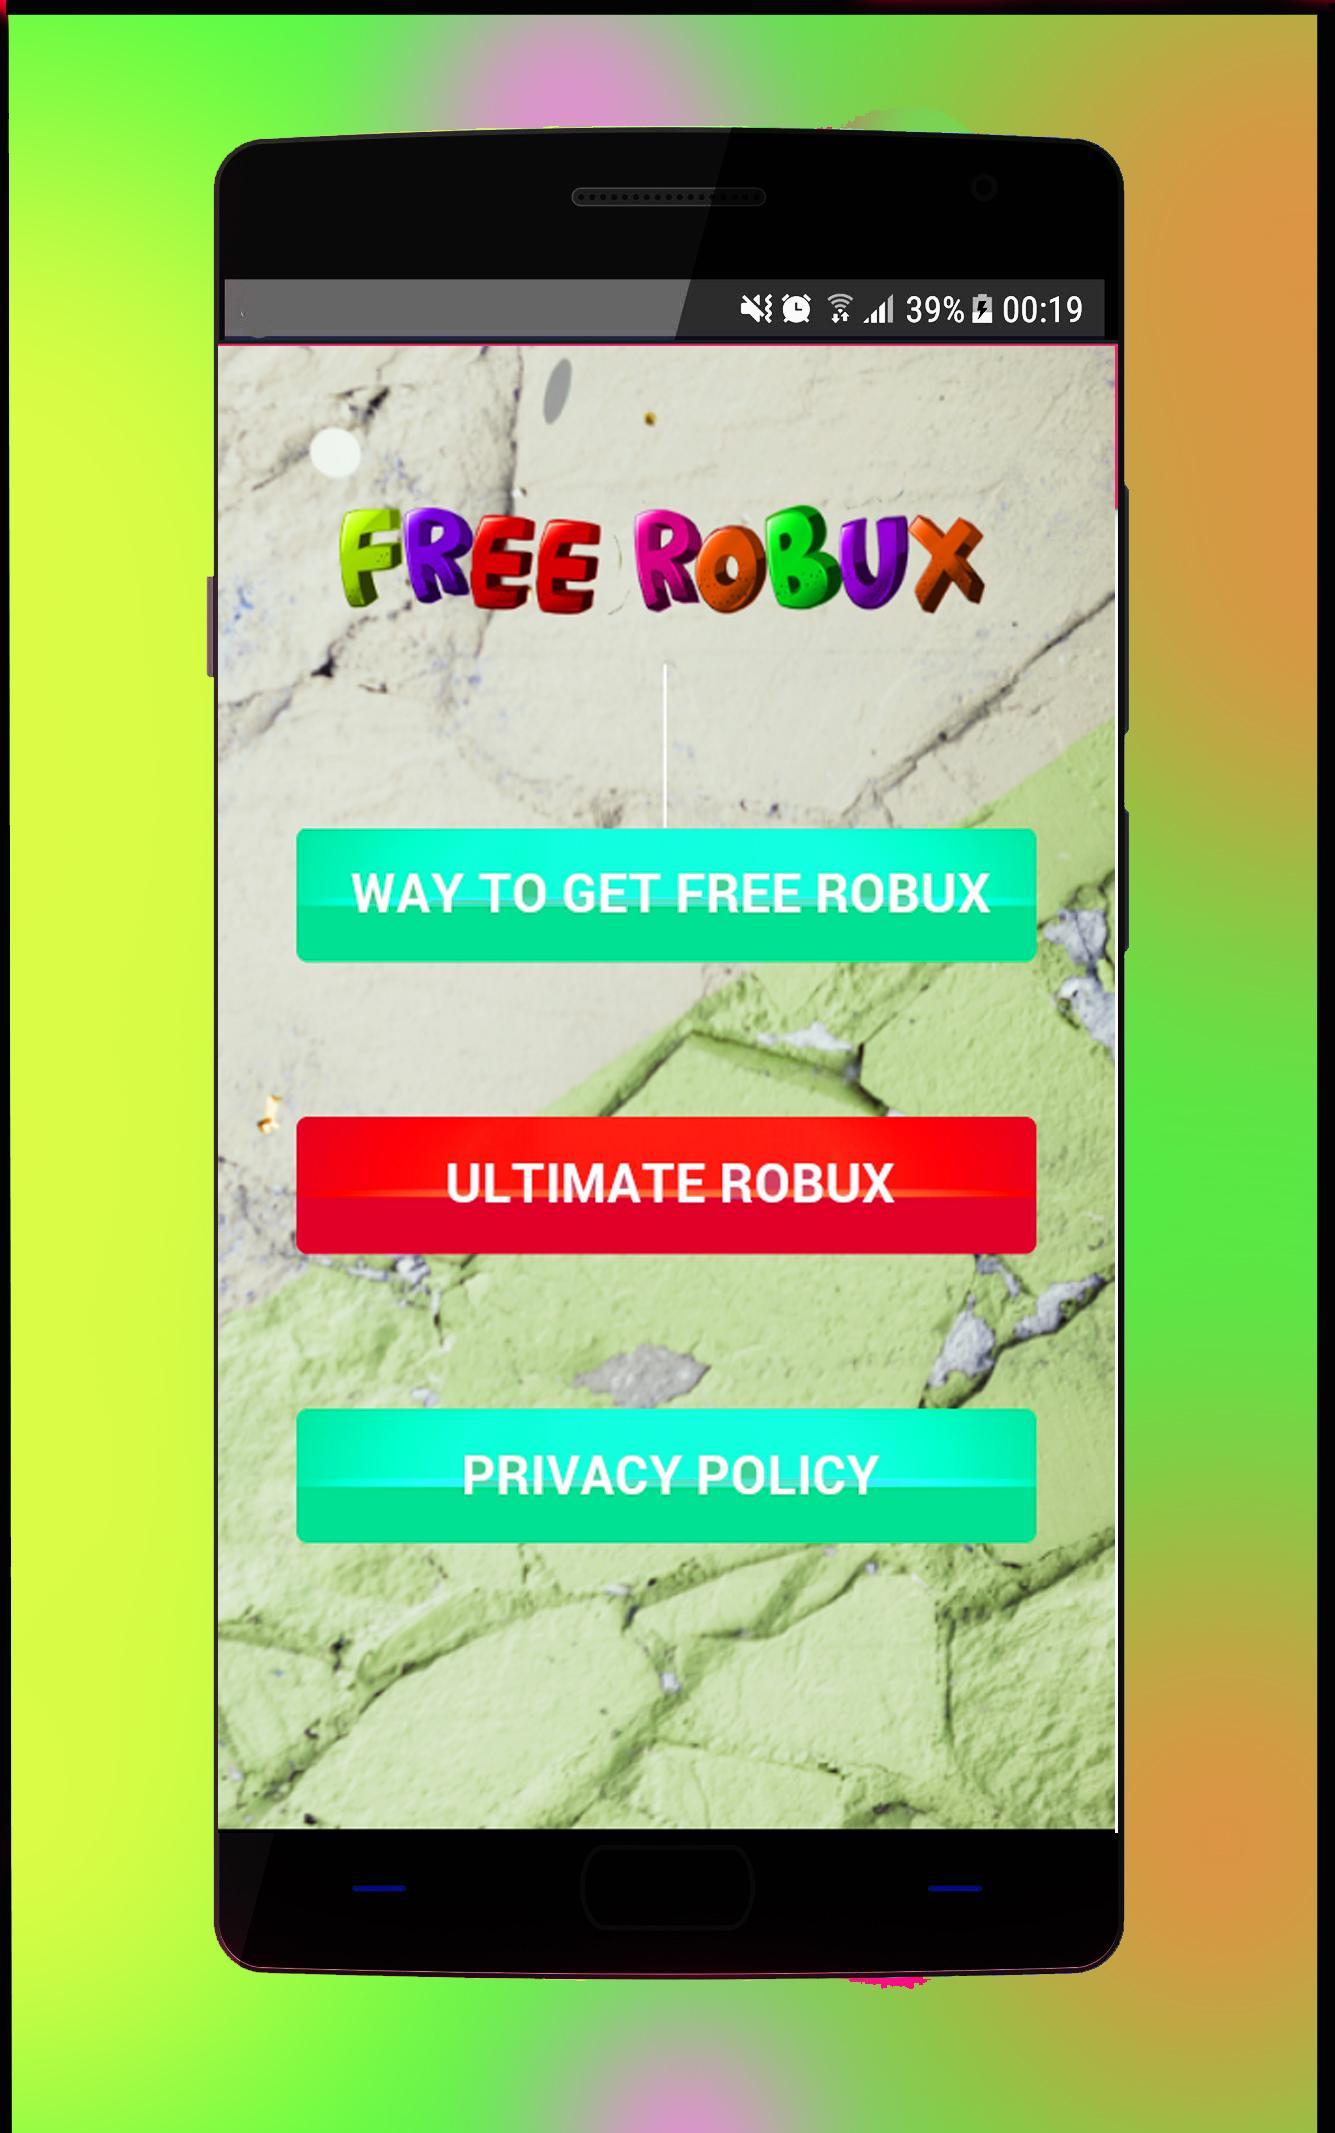 Get Free Robux Tips 2019 Now For Android Apk Download - minh robux